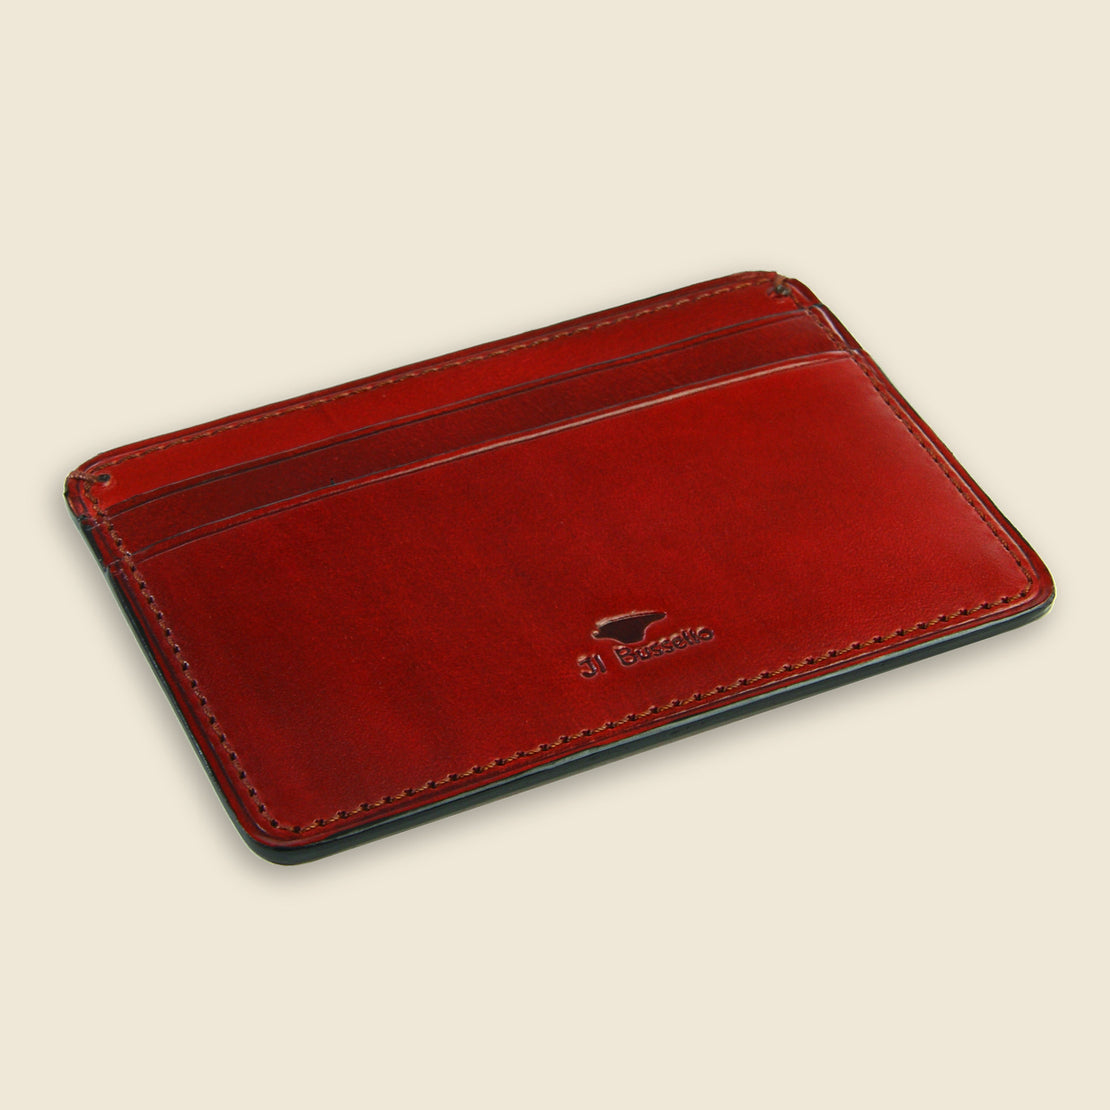 Credit Card Case - Cherry - Il Bussetto - STAG Provisions - Accessories - Wallets